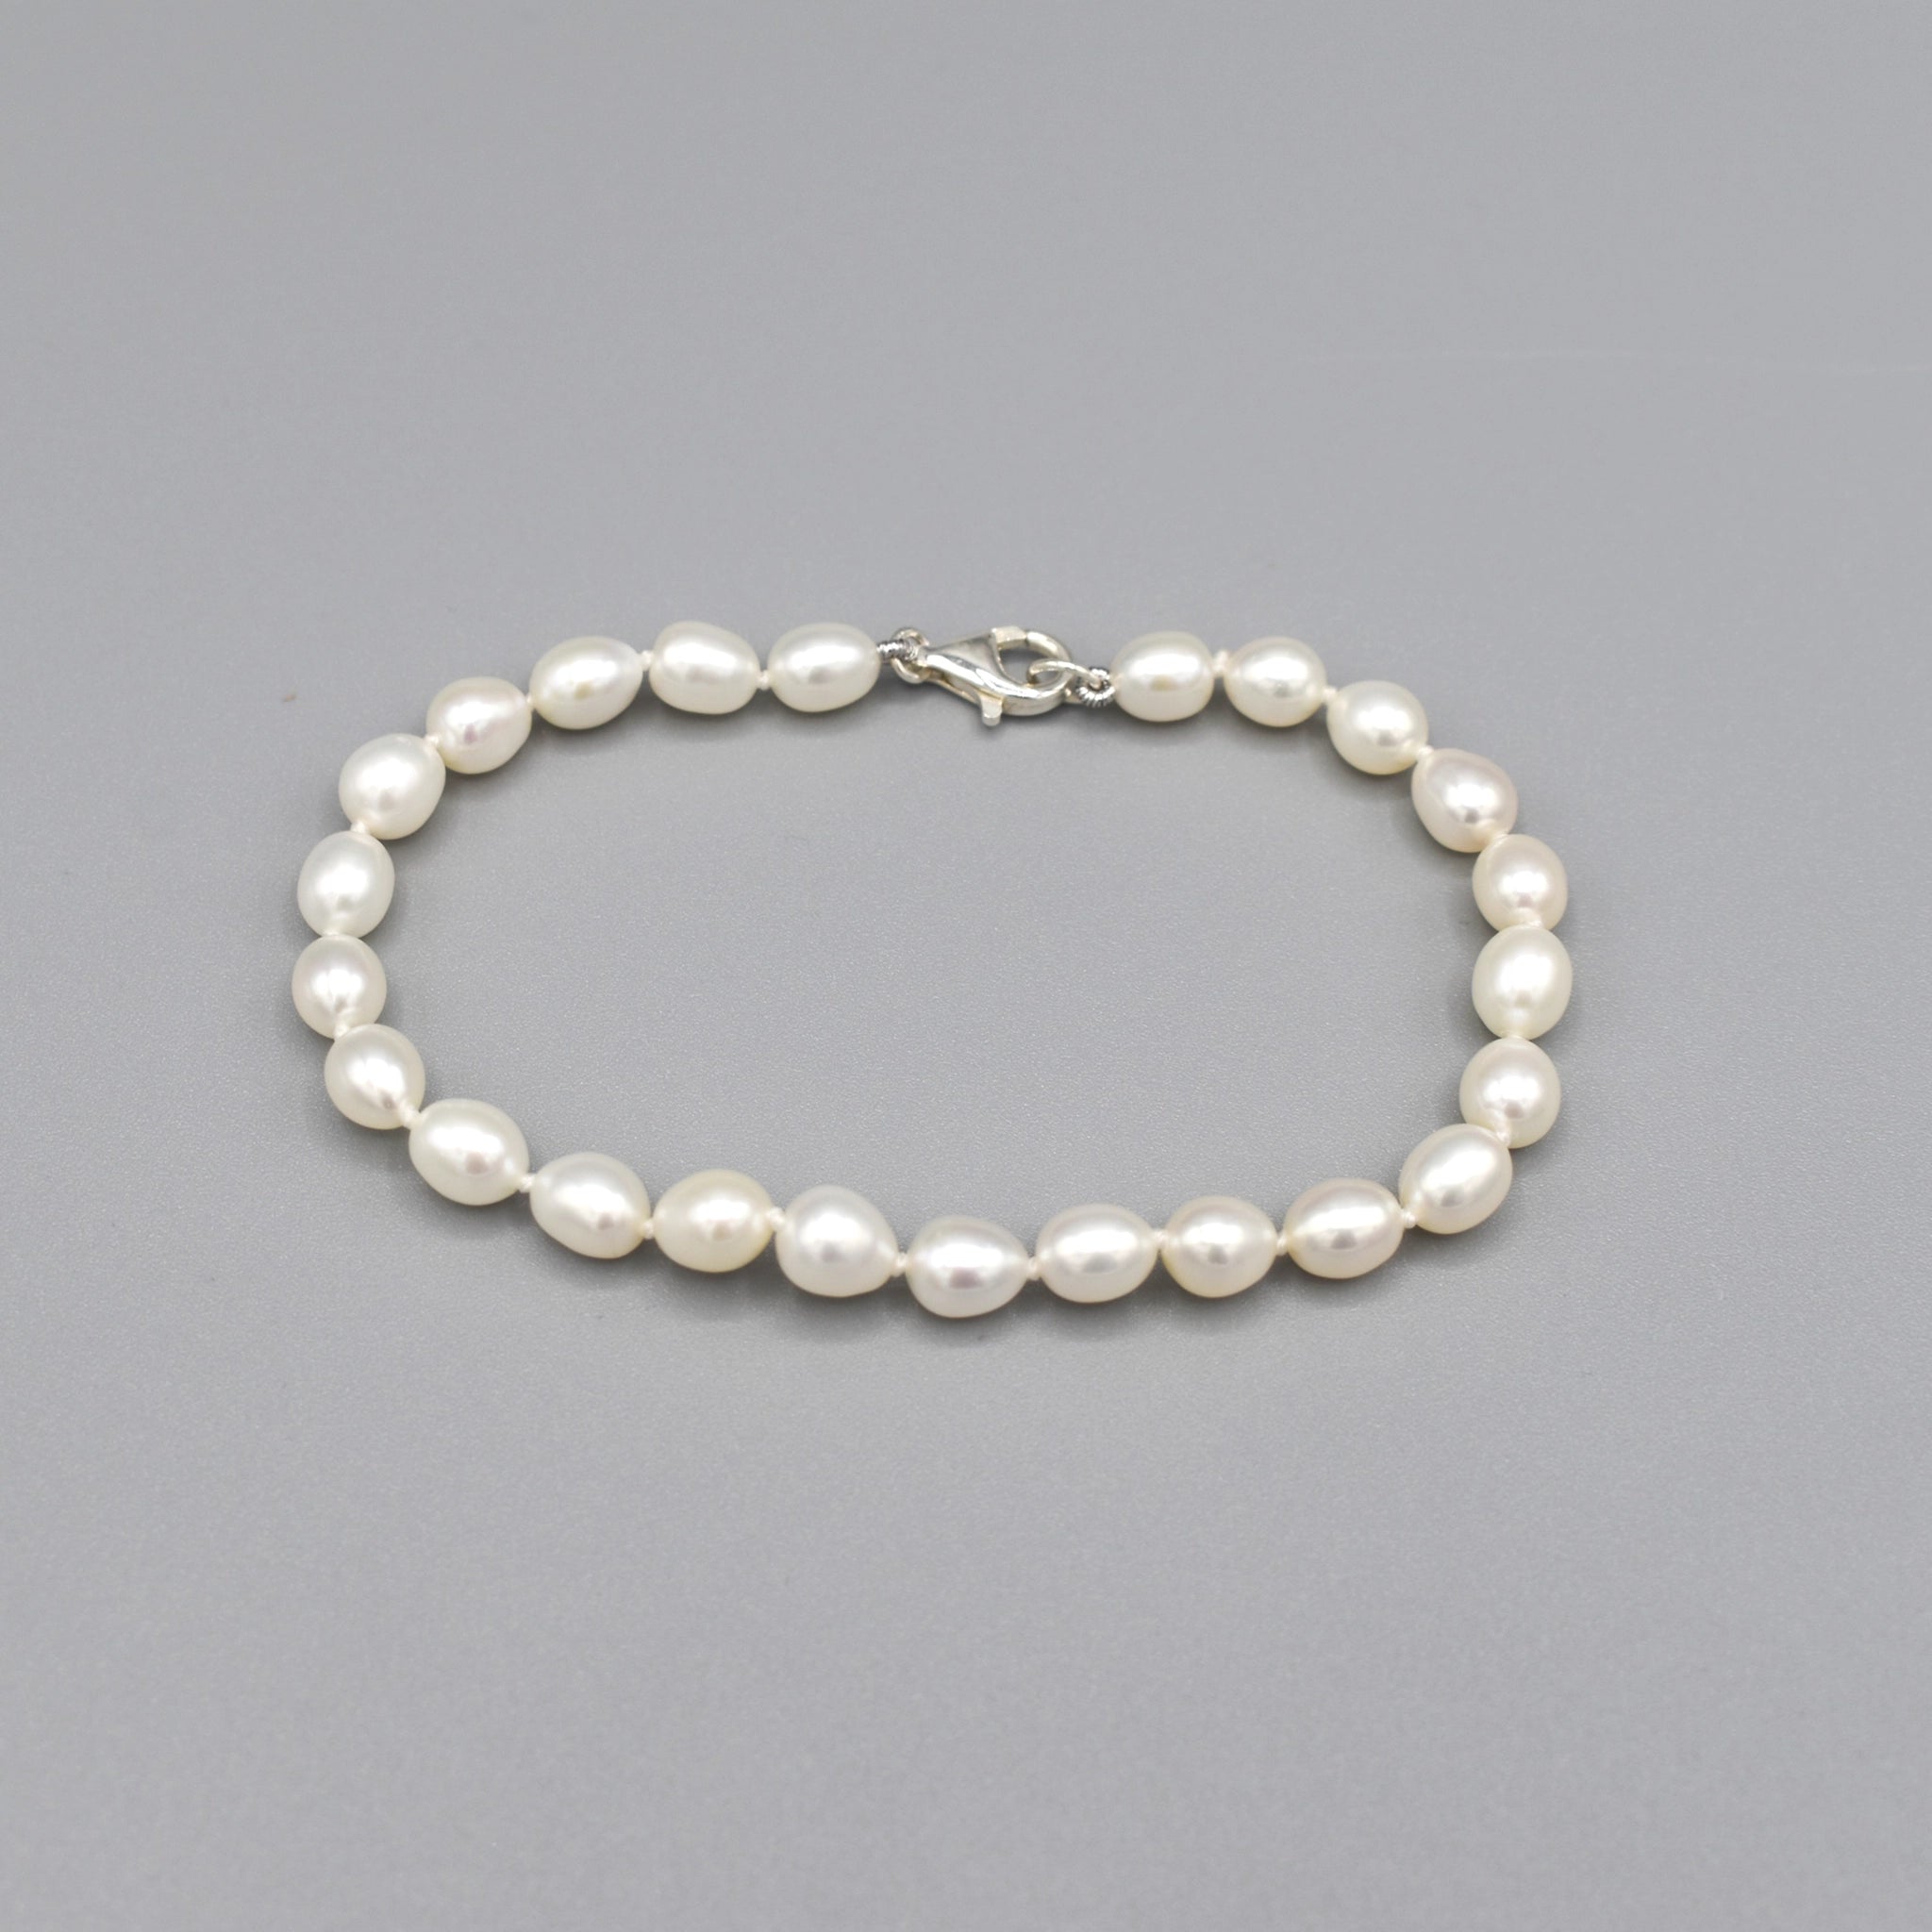 A silver lobster clasp bracelet strung with small oval shaped white freshwater pearls